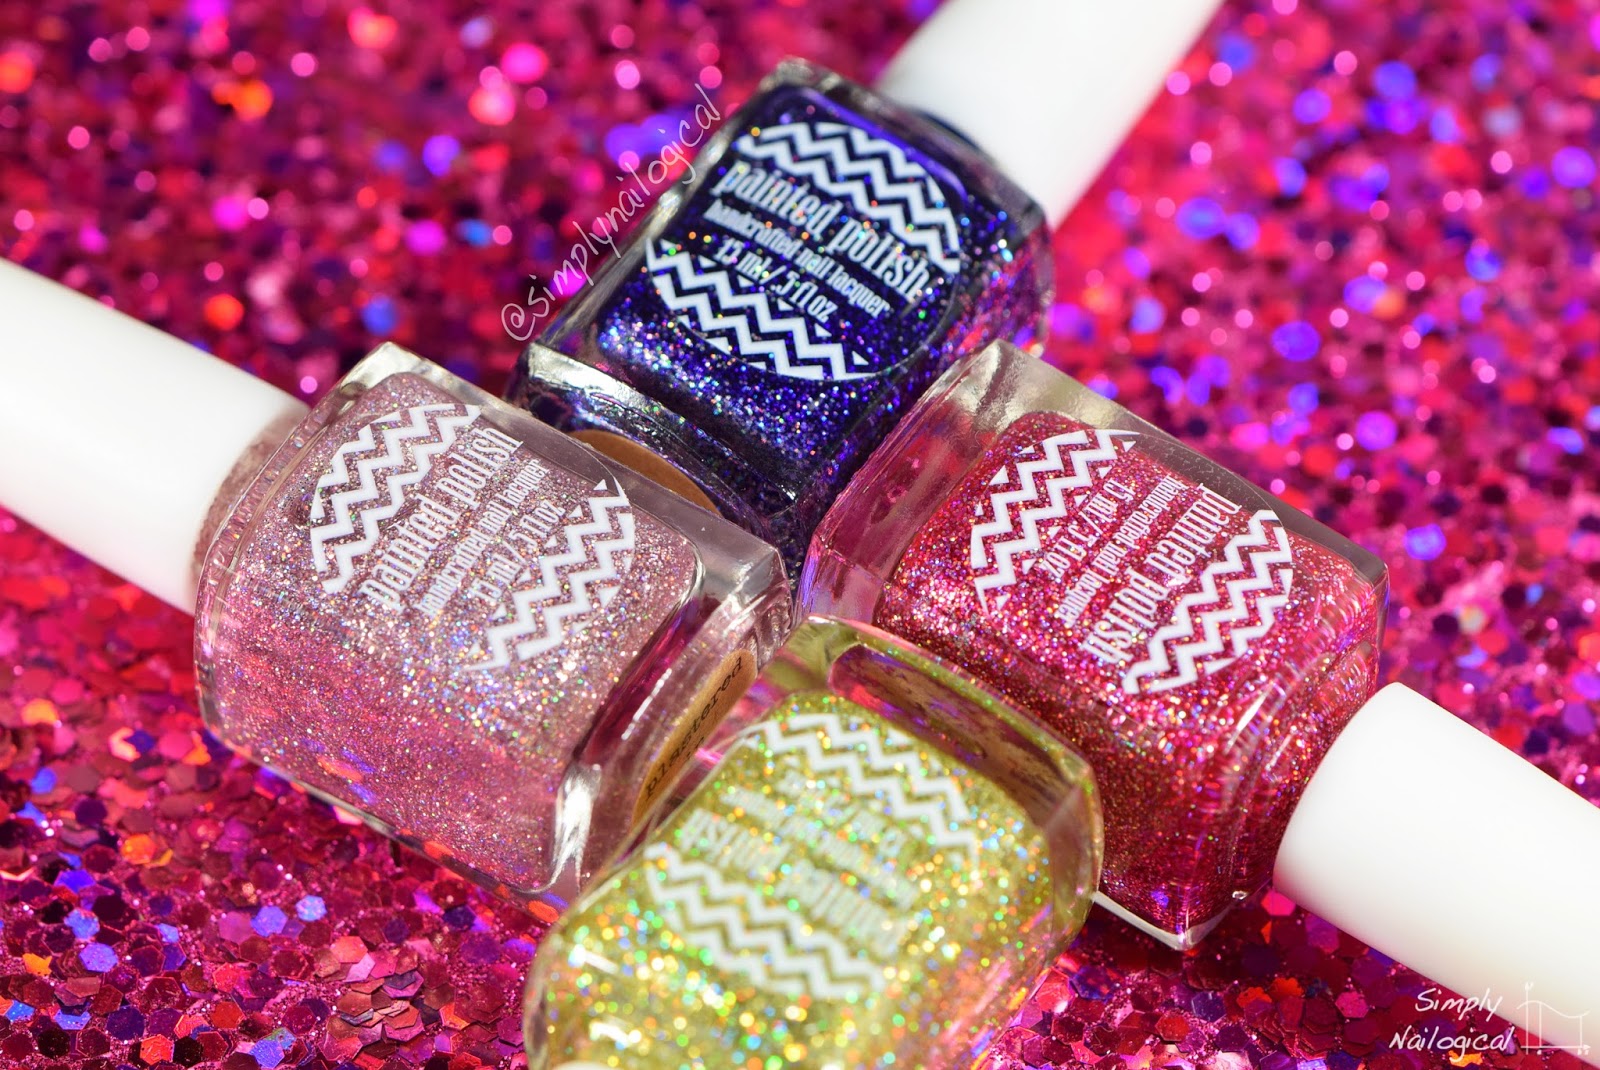 Simply Nailogical: Painted Polish releases four new holo glitters